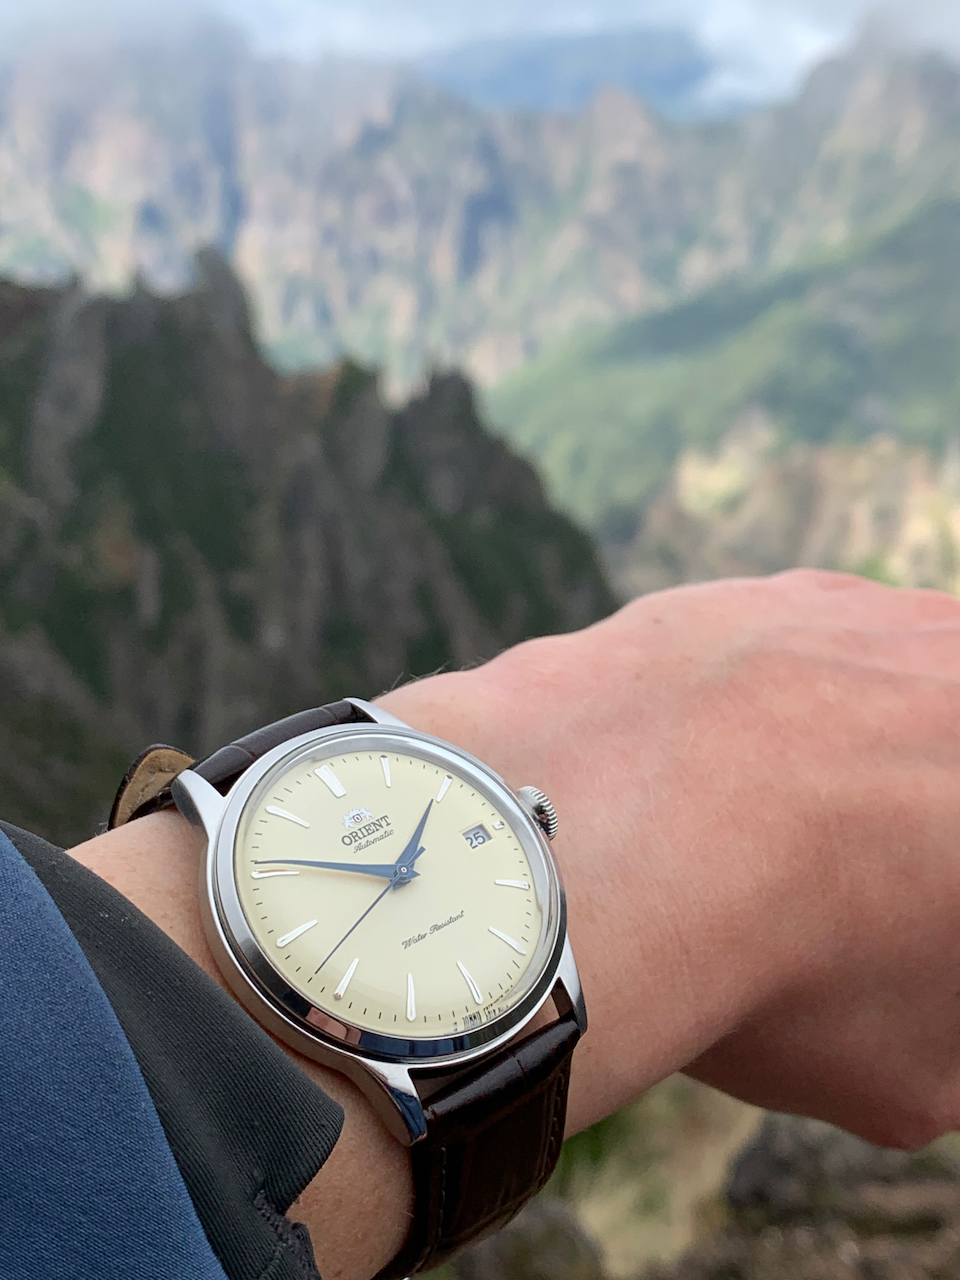 Orient Bambino: A Smaller Watch Making A Big Impact | WatchTime